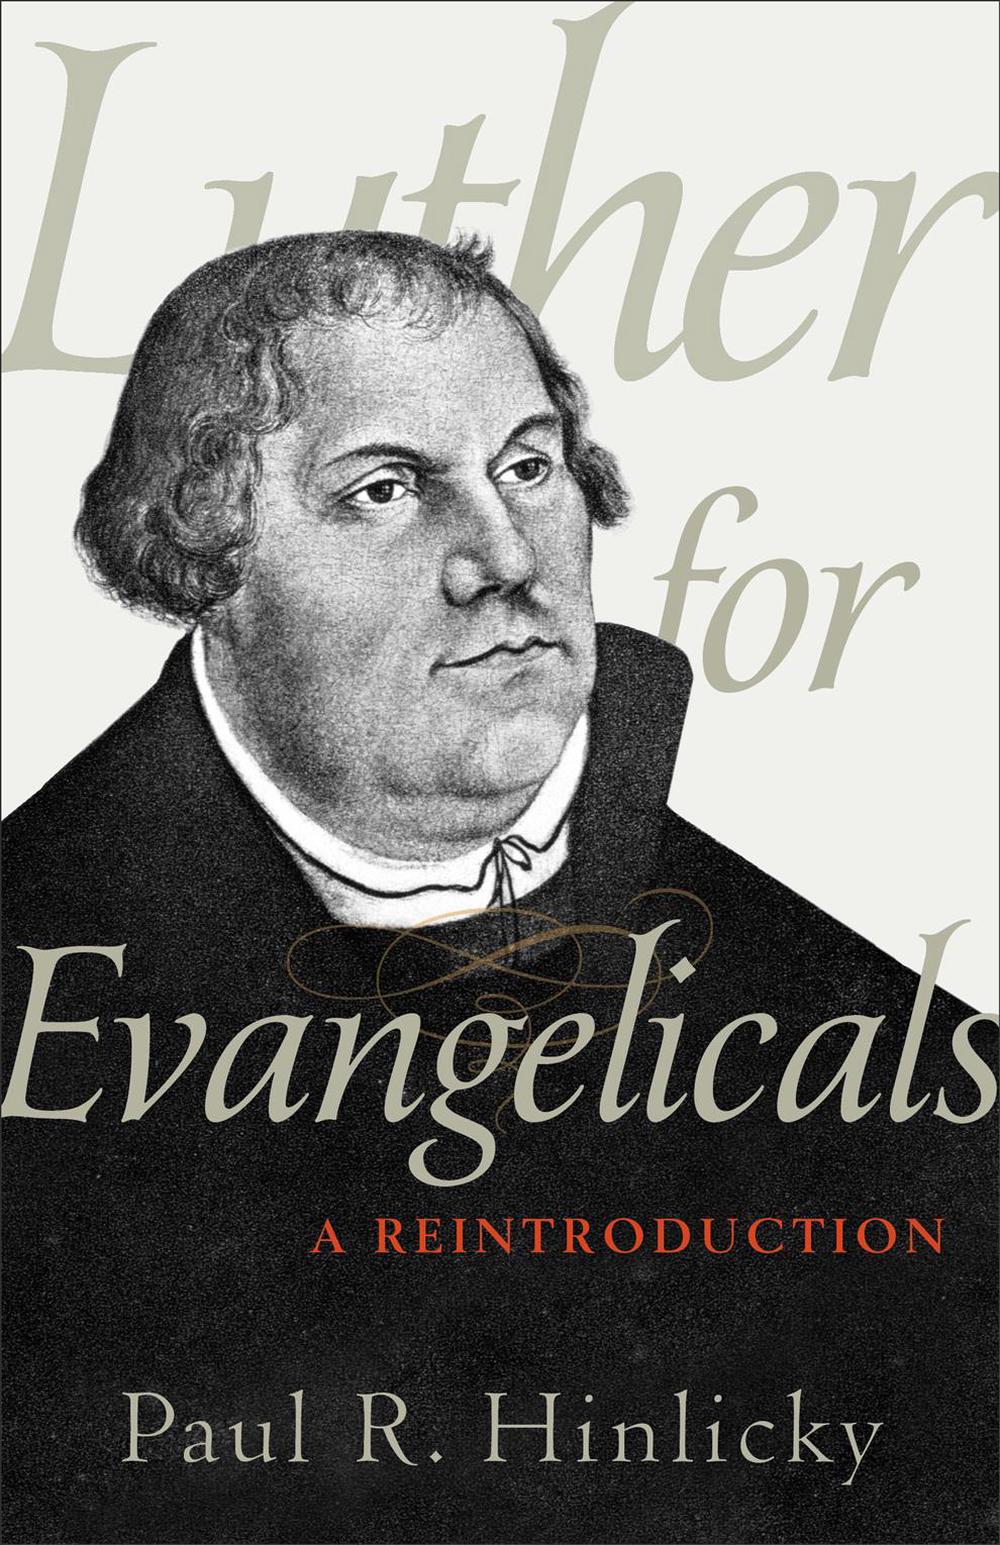 Luther for Evangelicals